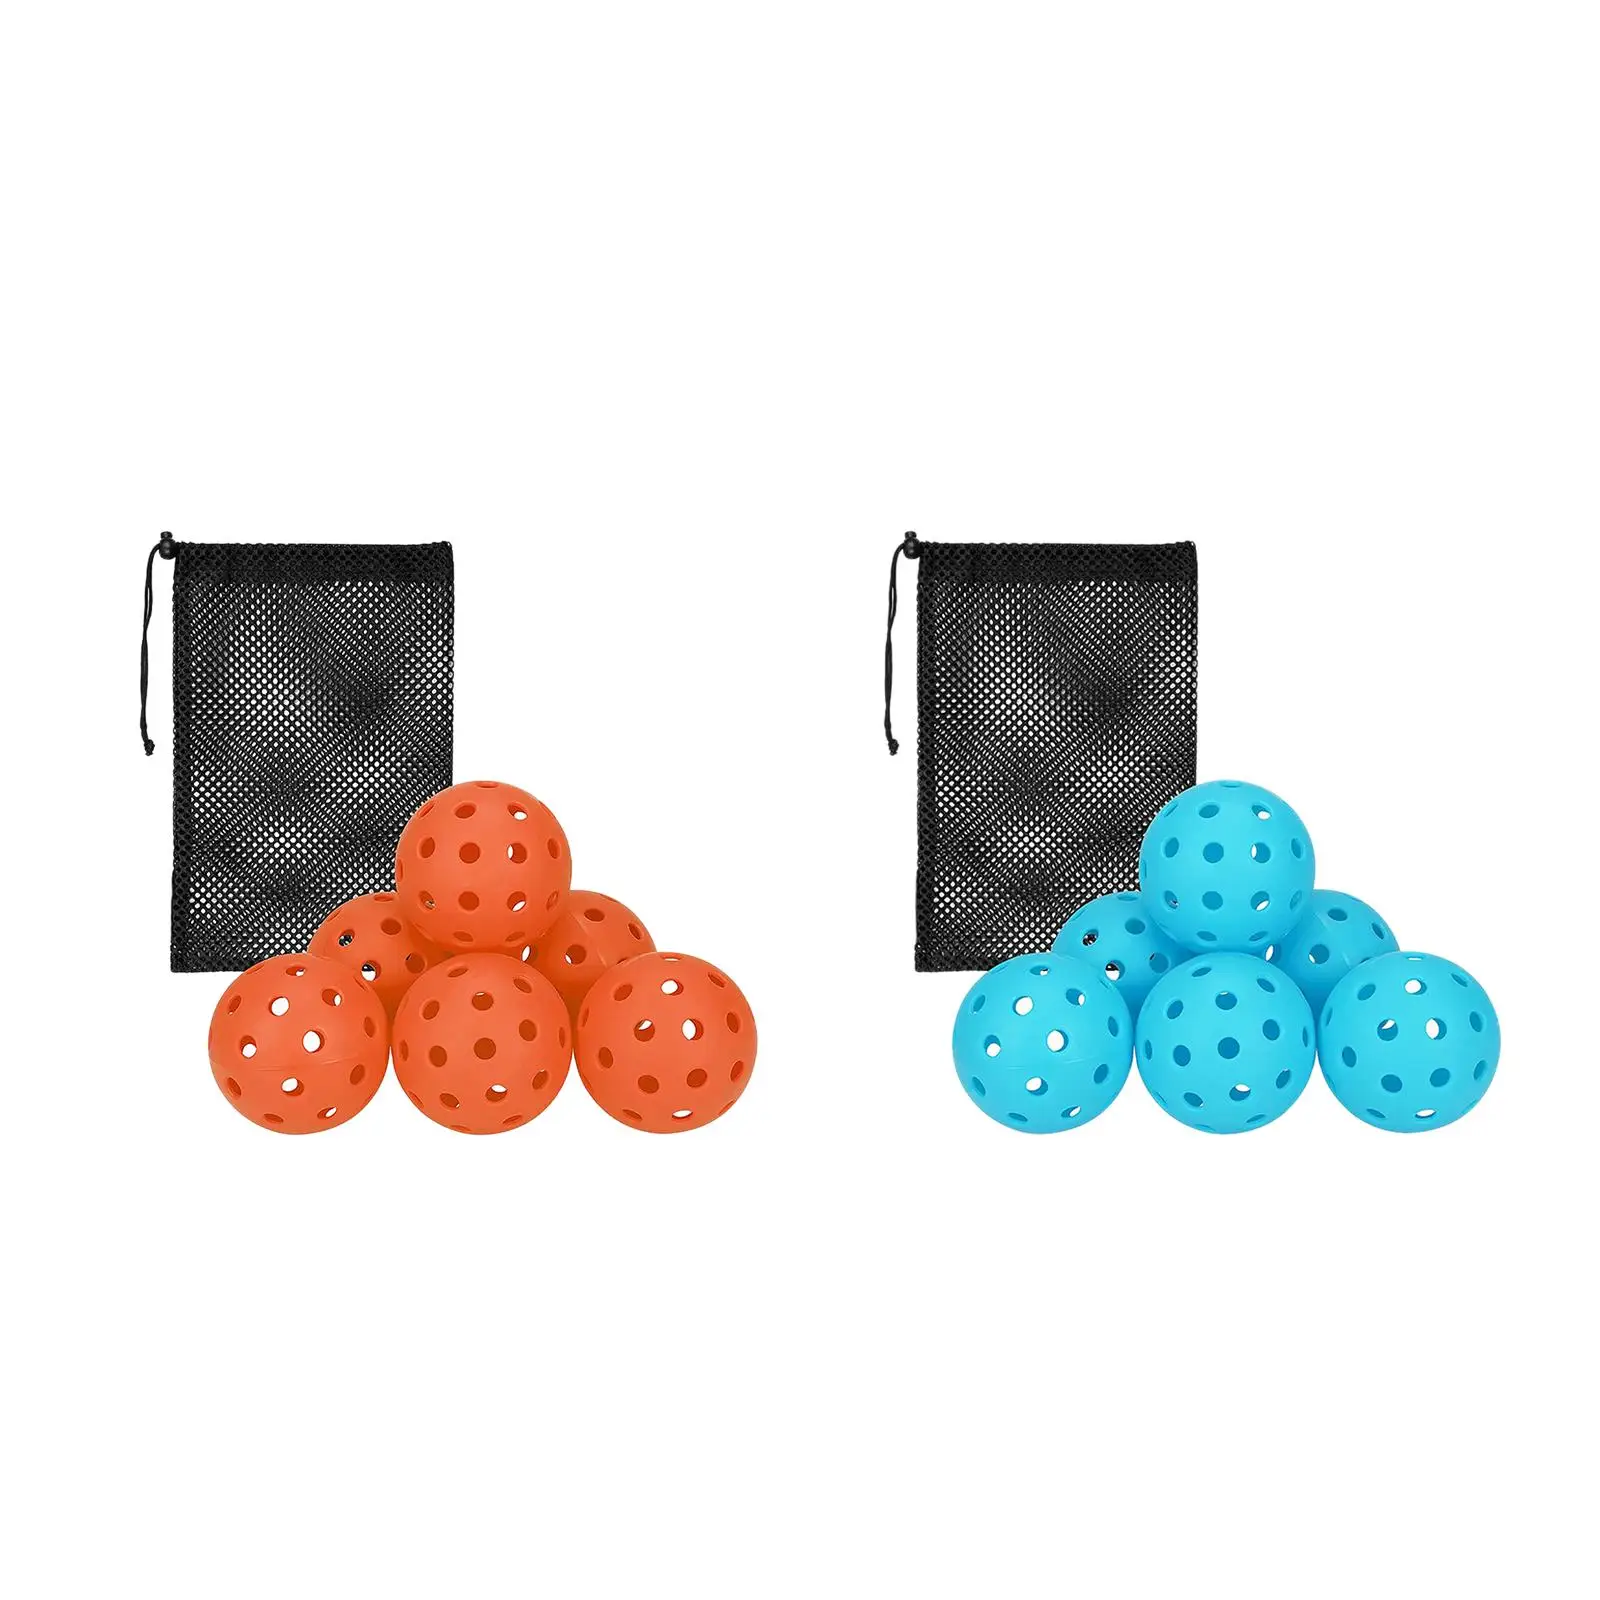 6x 40 Holes Pickleball Balls with Mesh Bag Pickleball Accessories for Adult